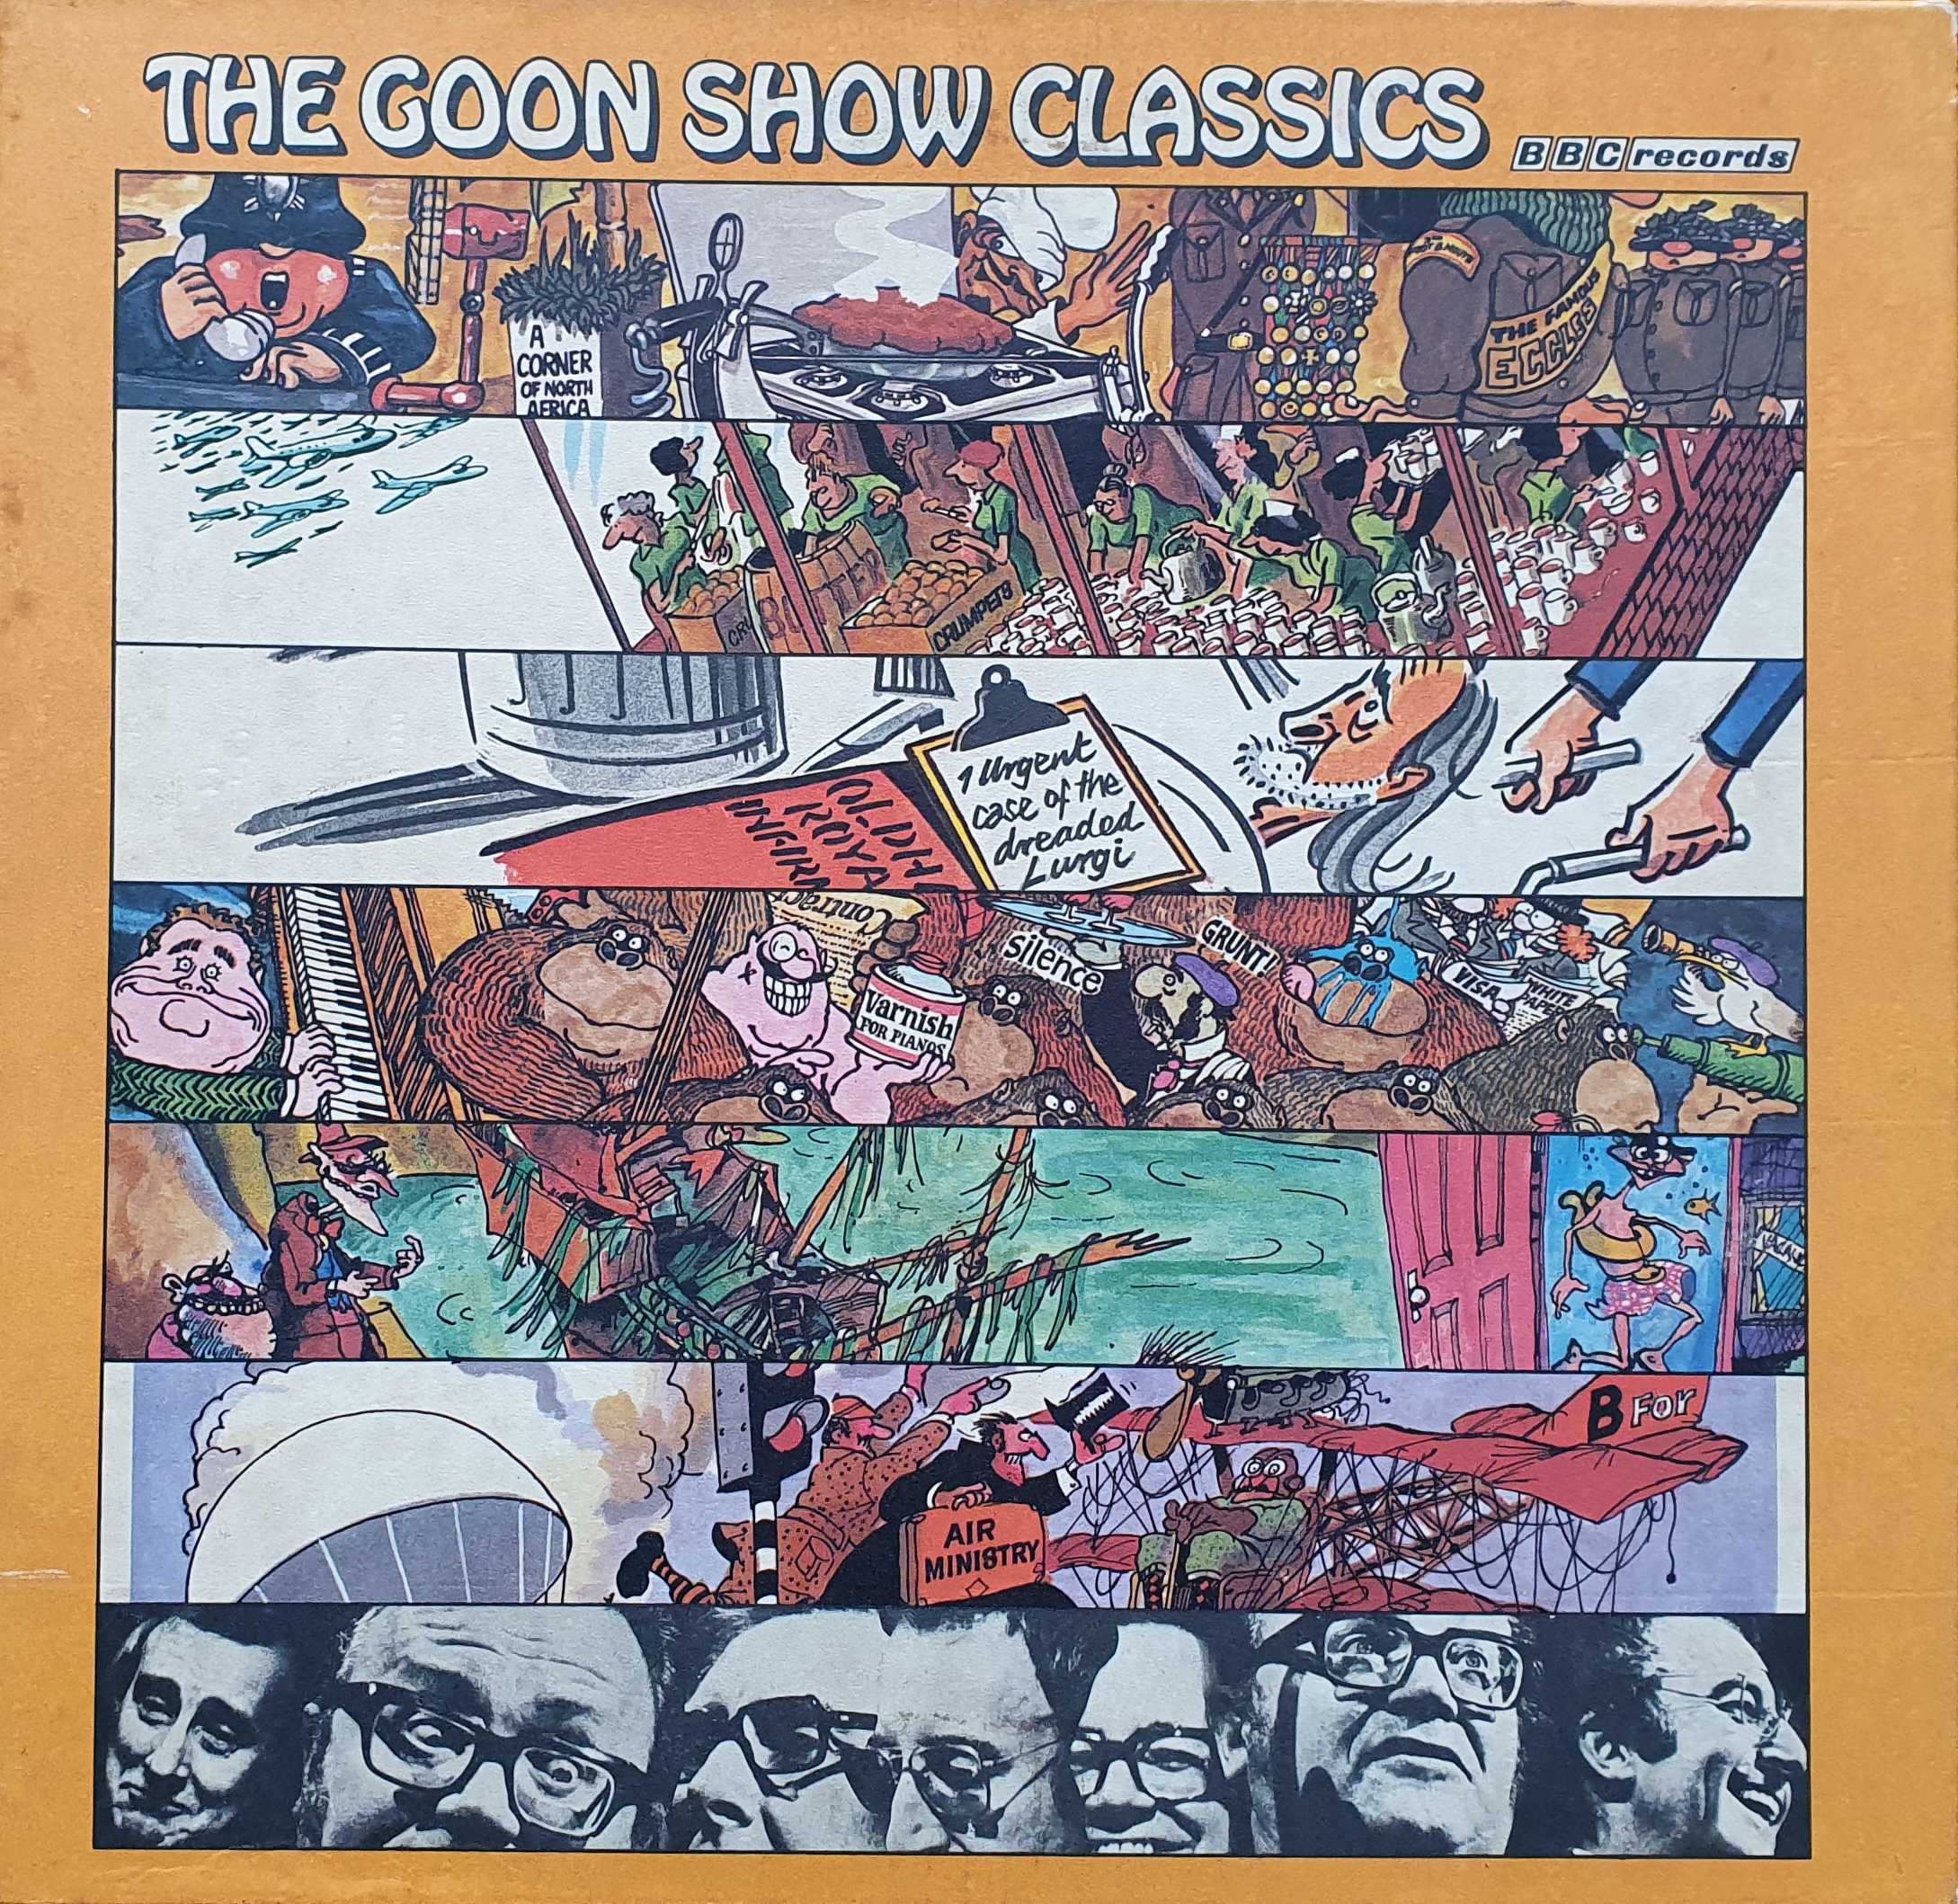 Picture of The Goon Show classics by artist The Goons from the BBC albums - Records and Tapes library